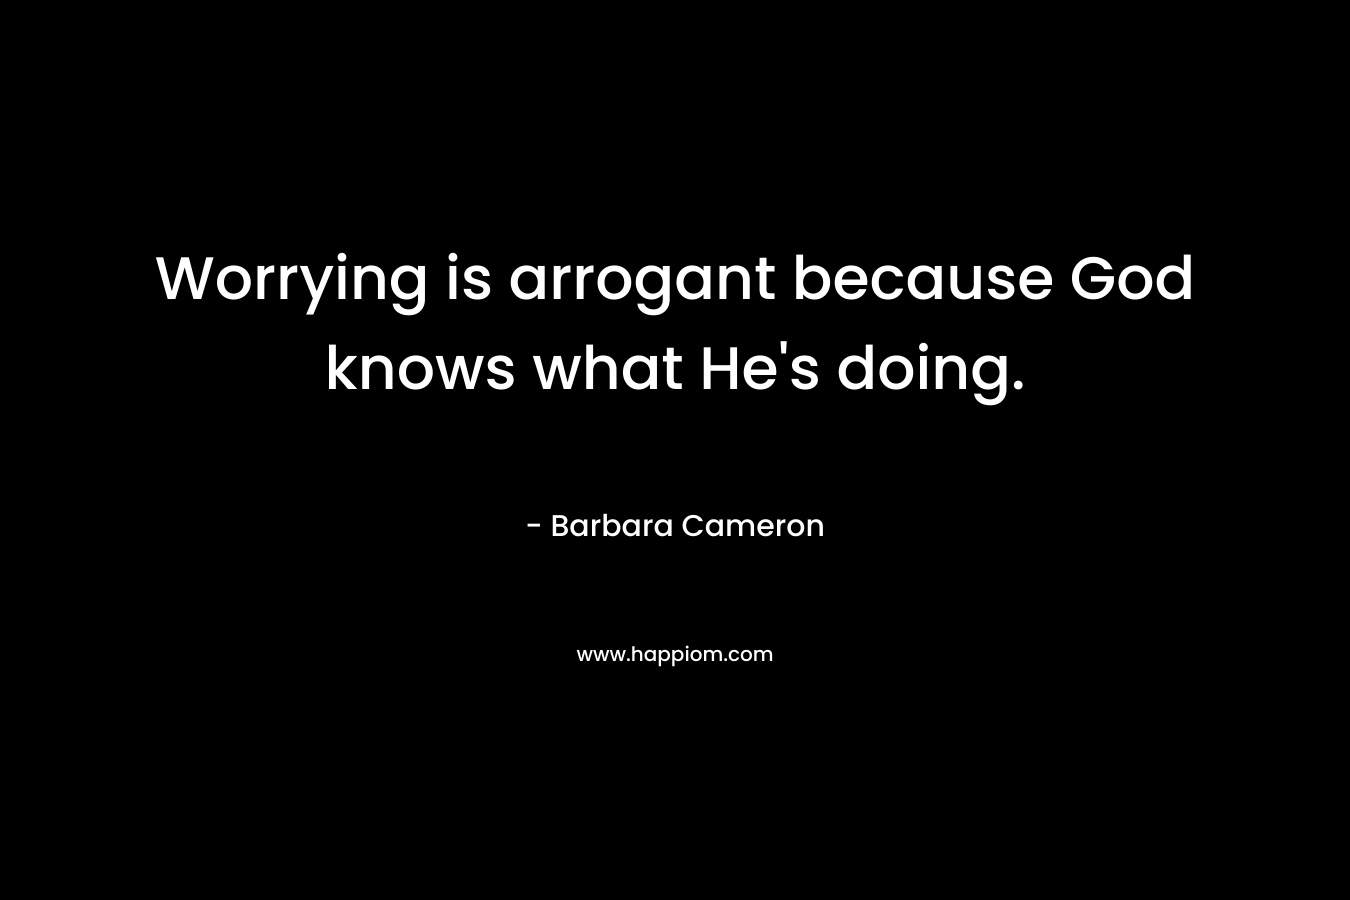 Worrying is arrogant because God knows what He's doing.